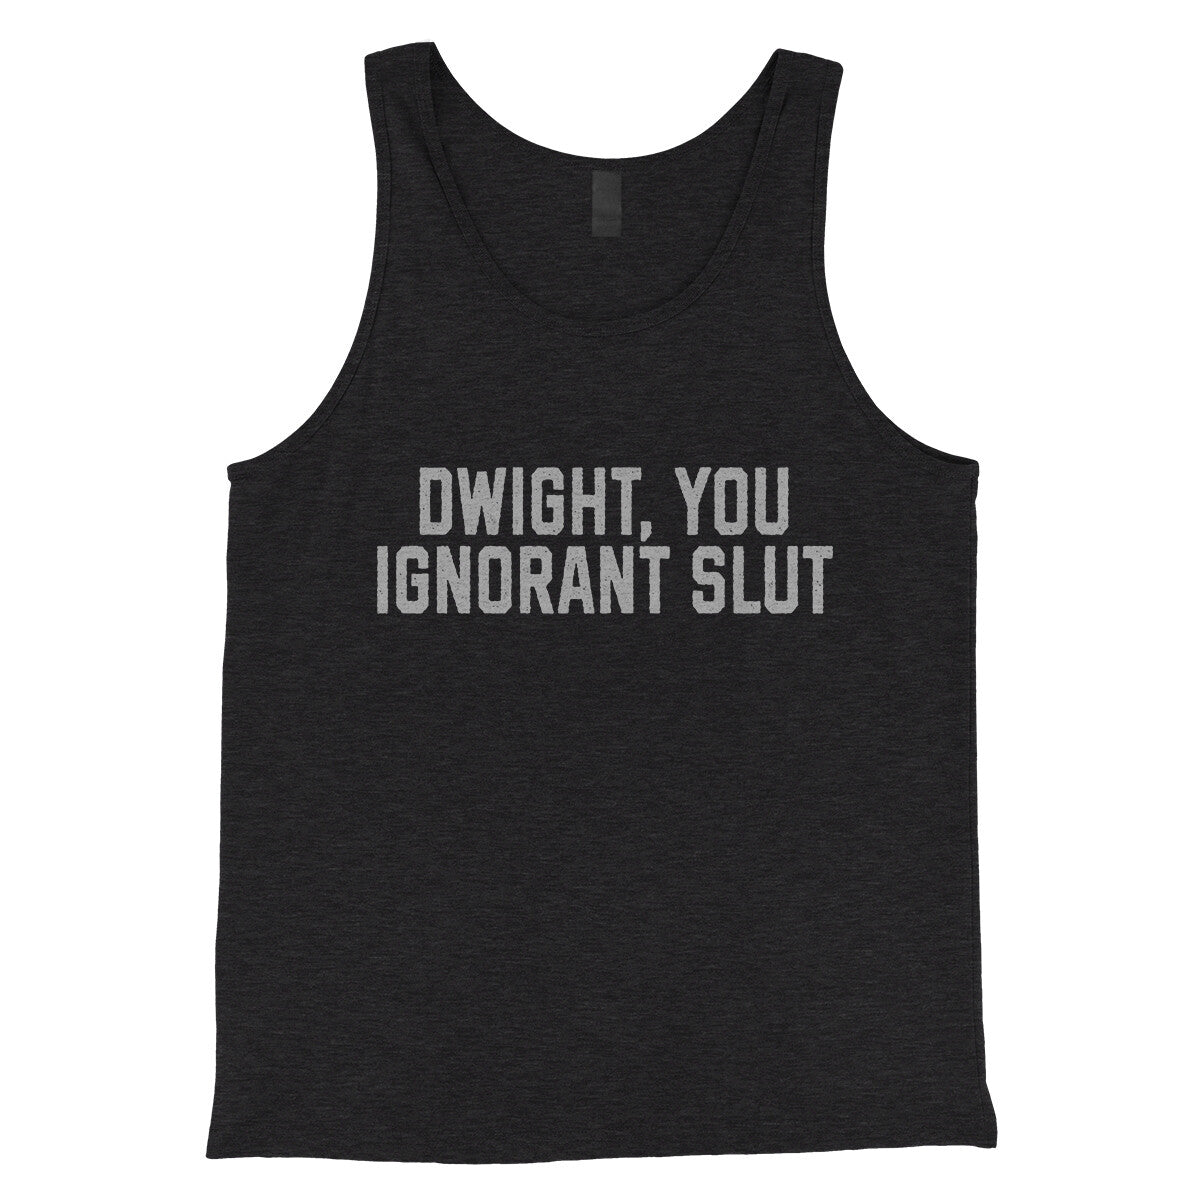 Dwight You Ignorant Slut in Charcoal Black TriBlend Color